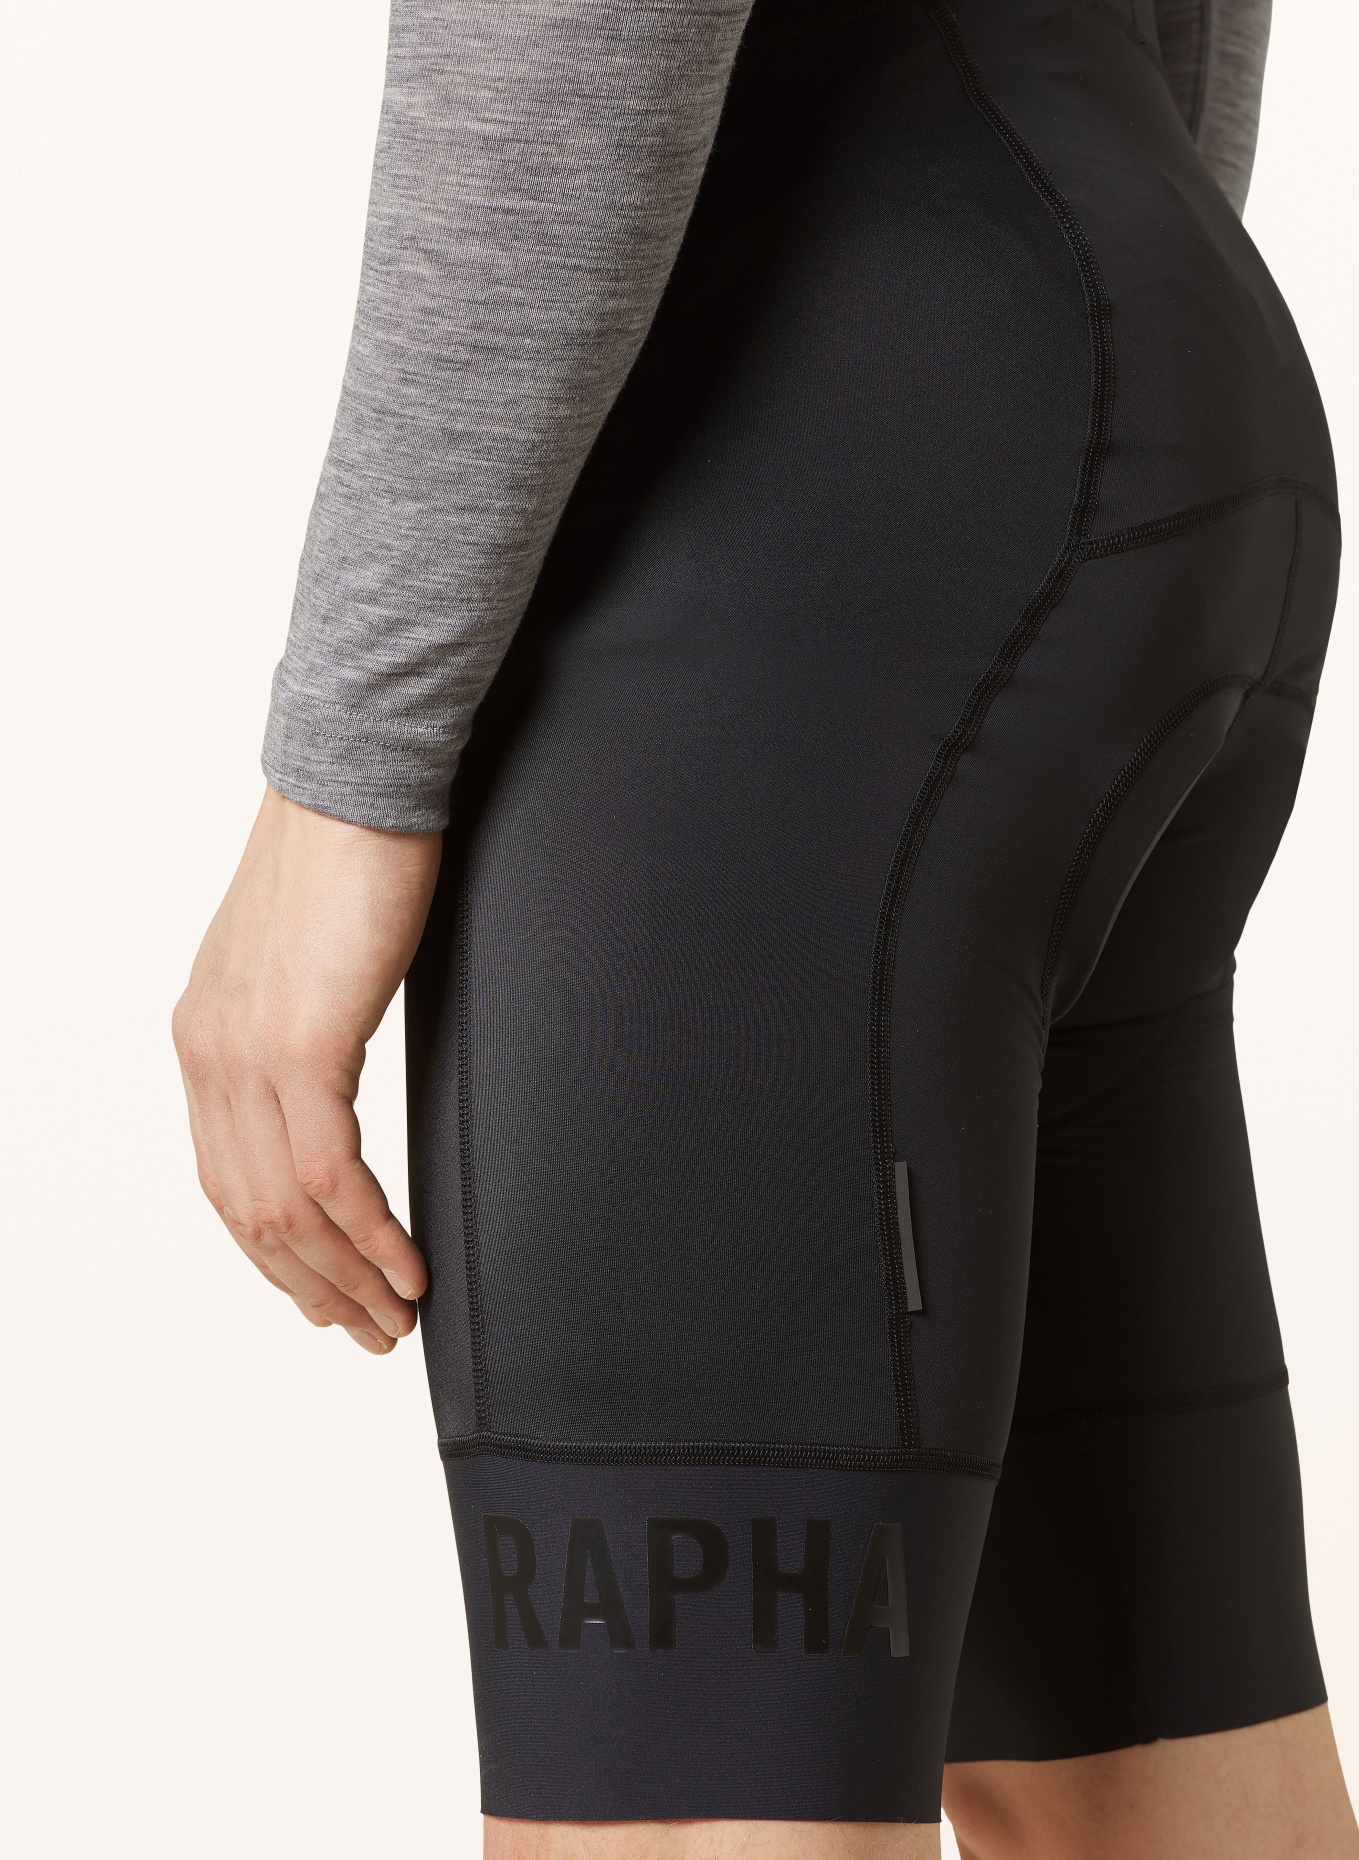 Rapha Cycling shorts PRO TEAM with straps and padded insert, Color: BLACK (Image 5)